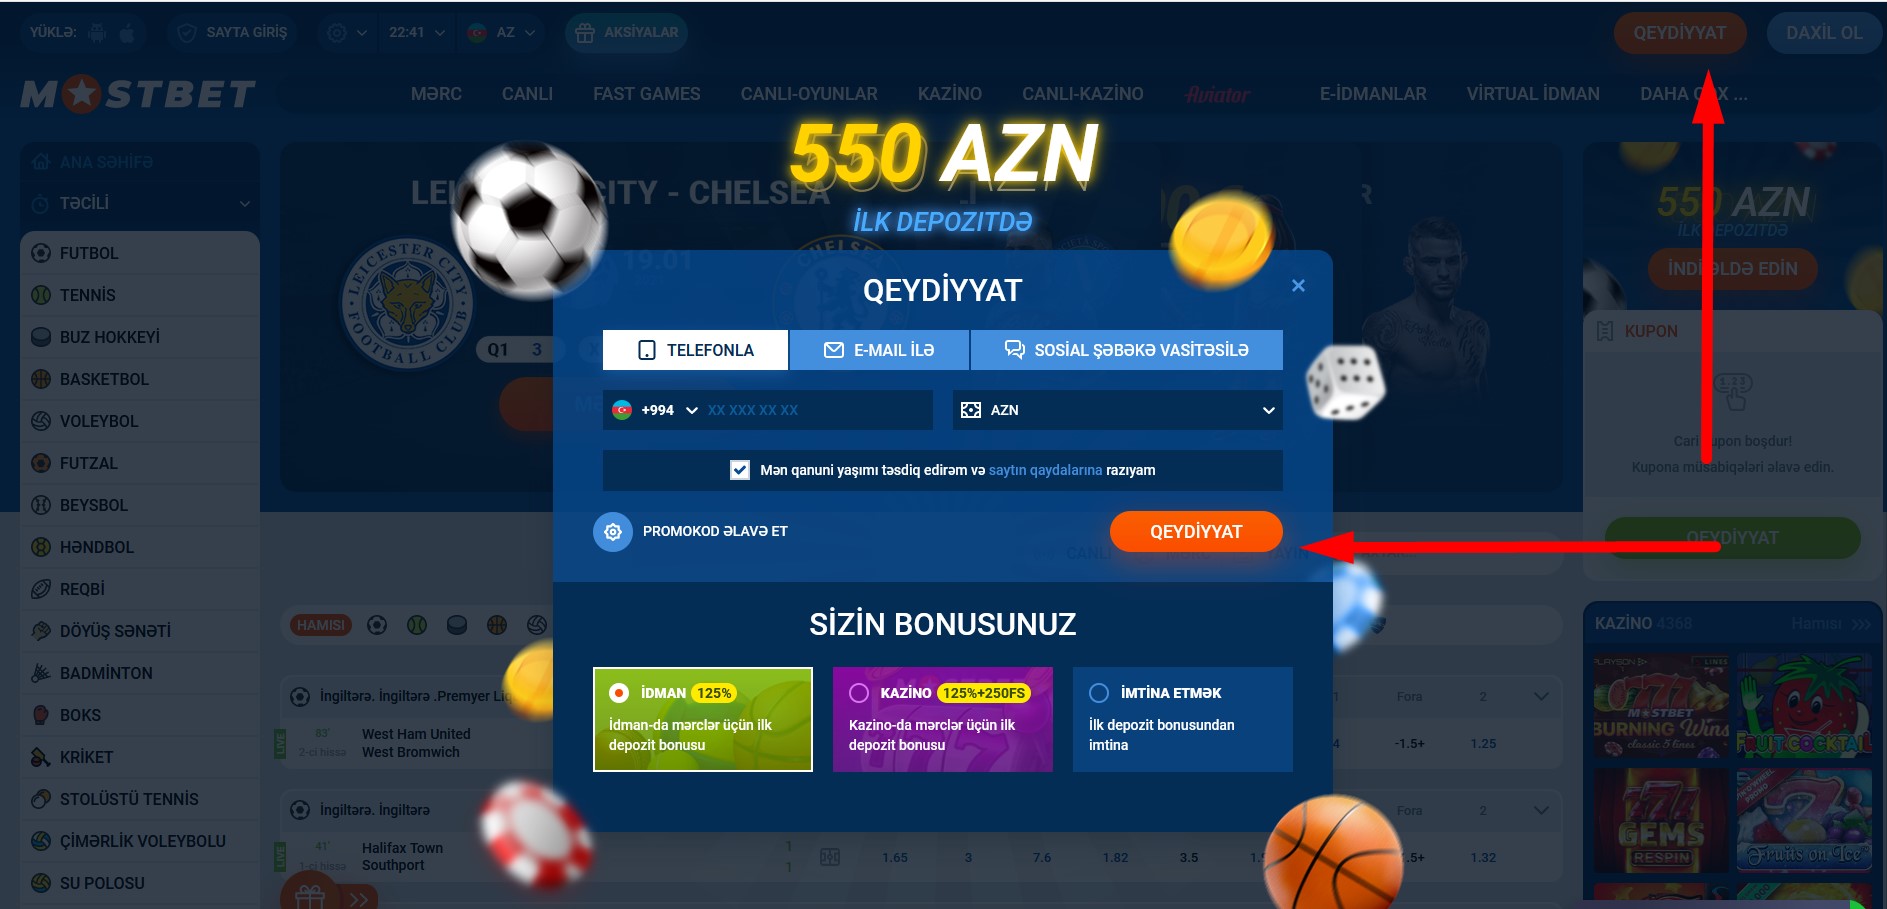 5 Brilliant Ways To Teach Your Audience About Mostbet bookmaker and online casino in Azerbaijan